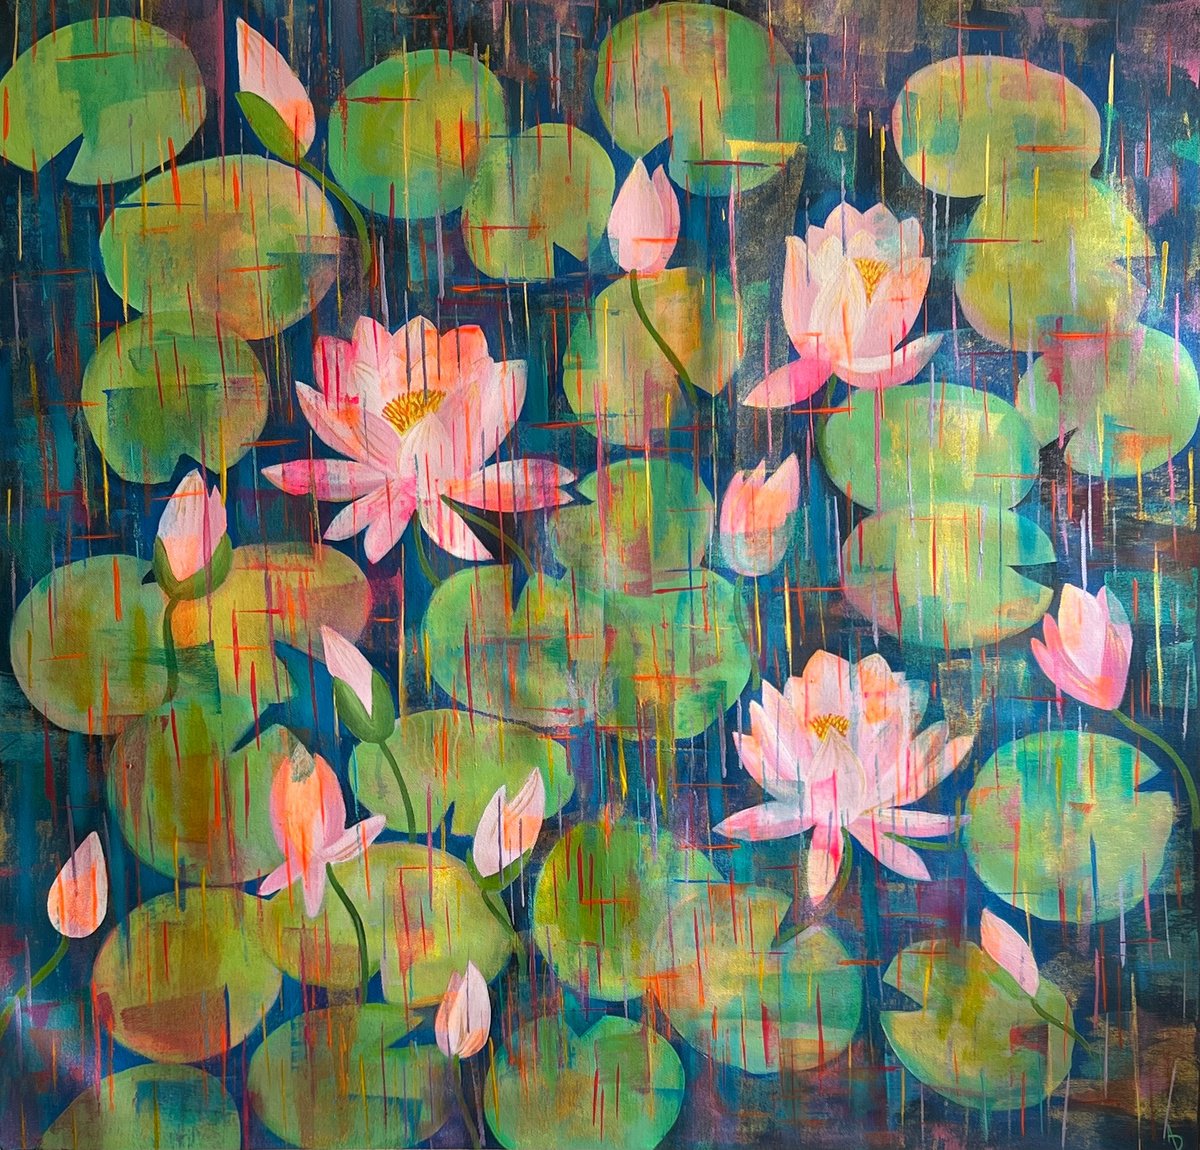 Lily pond of passion ! Large square painting by Amita Dand